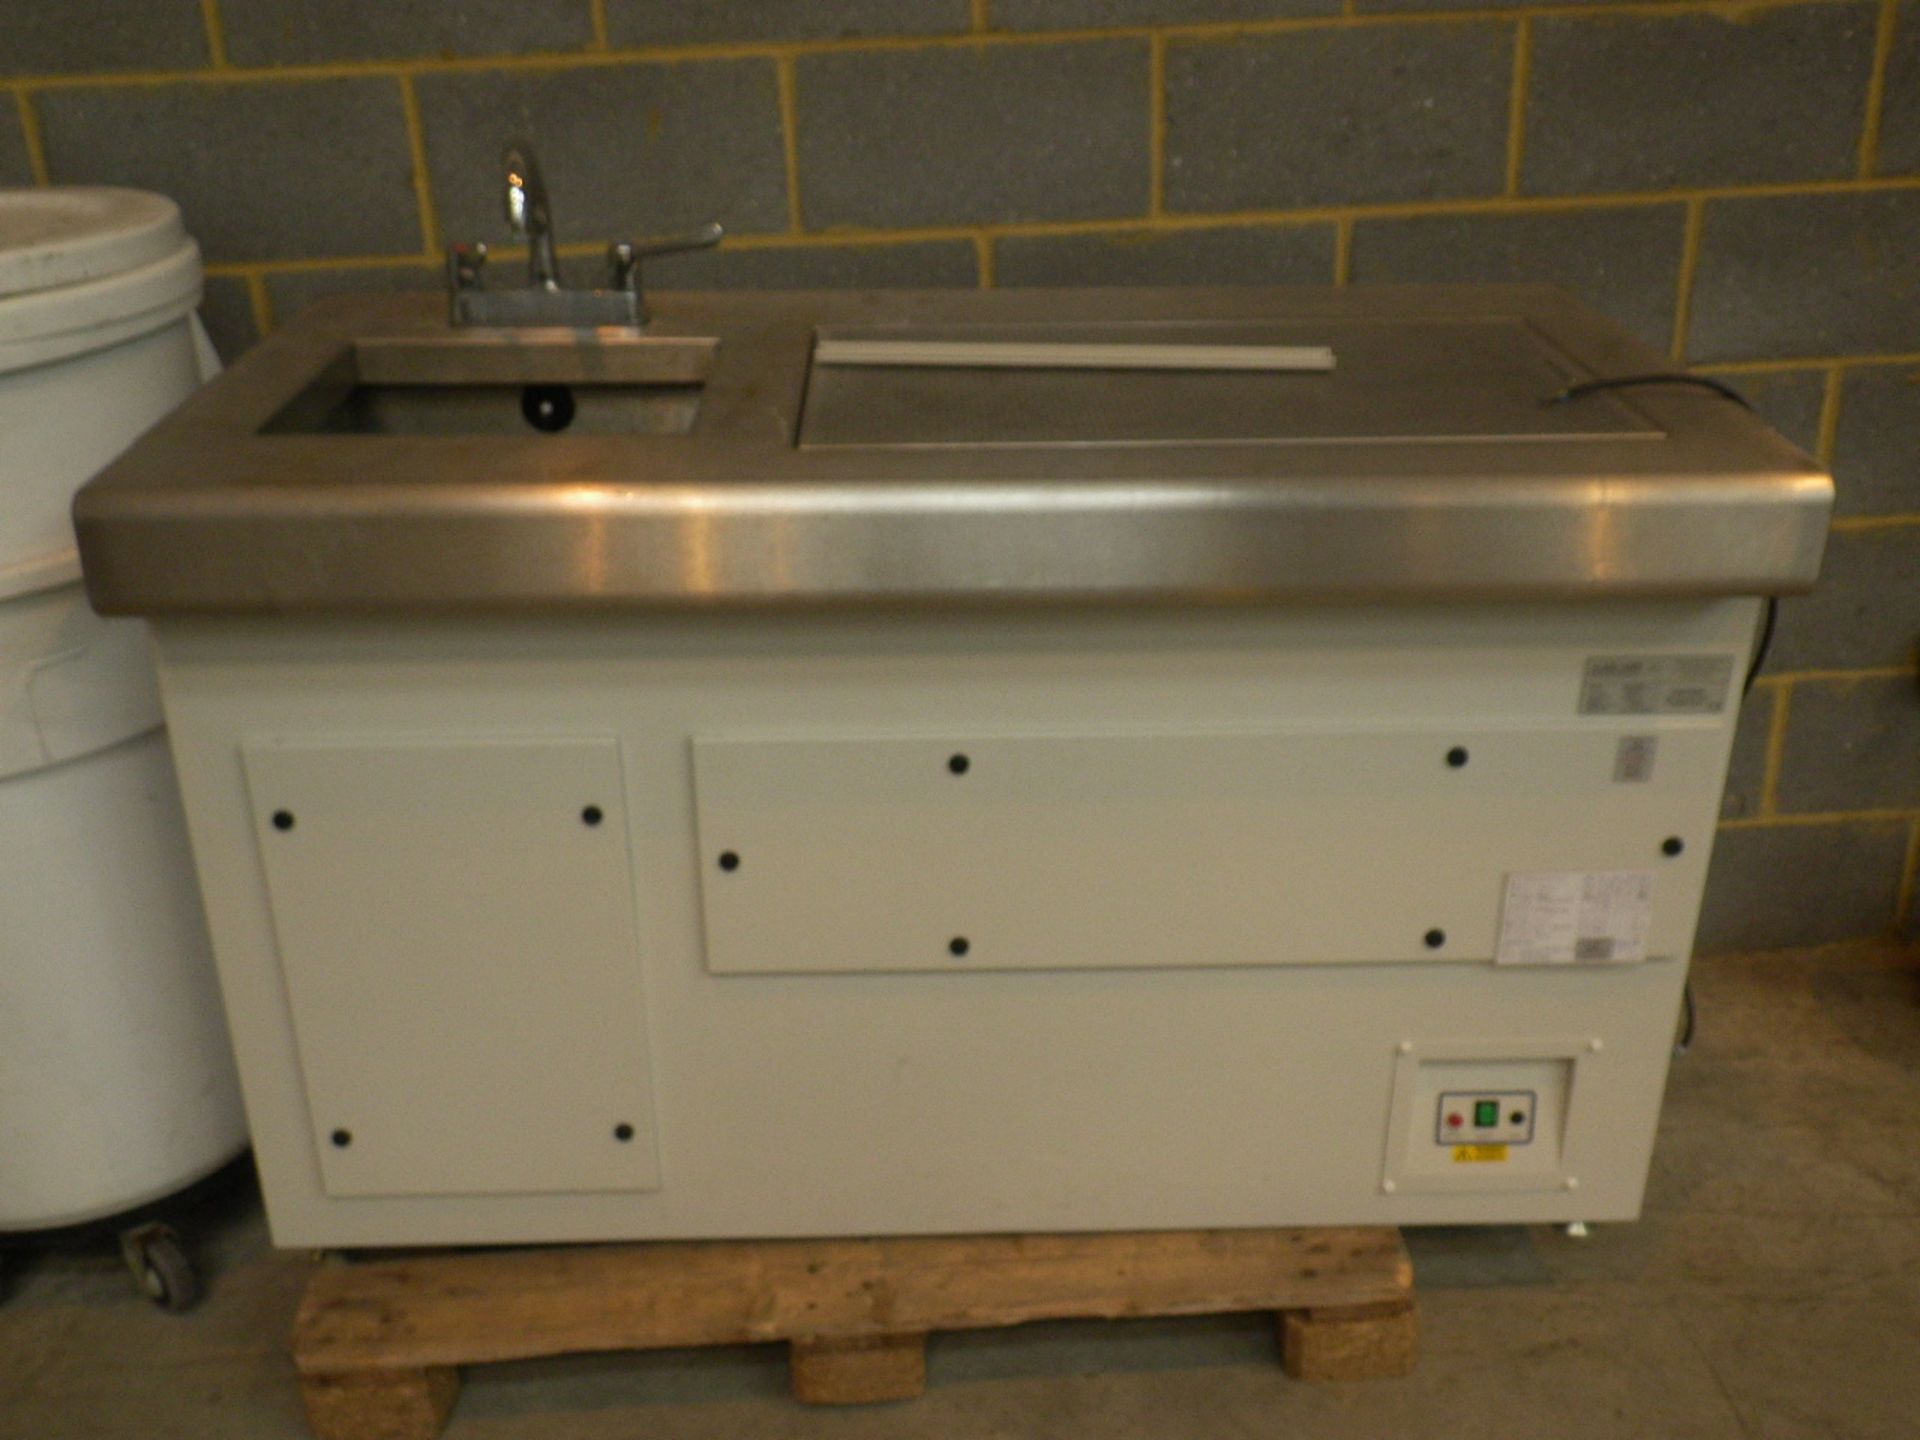 Labcaire Downflow Bench With Sink *Untested Due To Cut Plug*